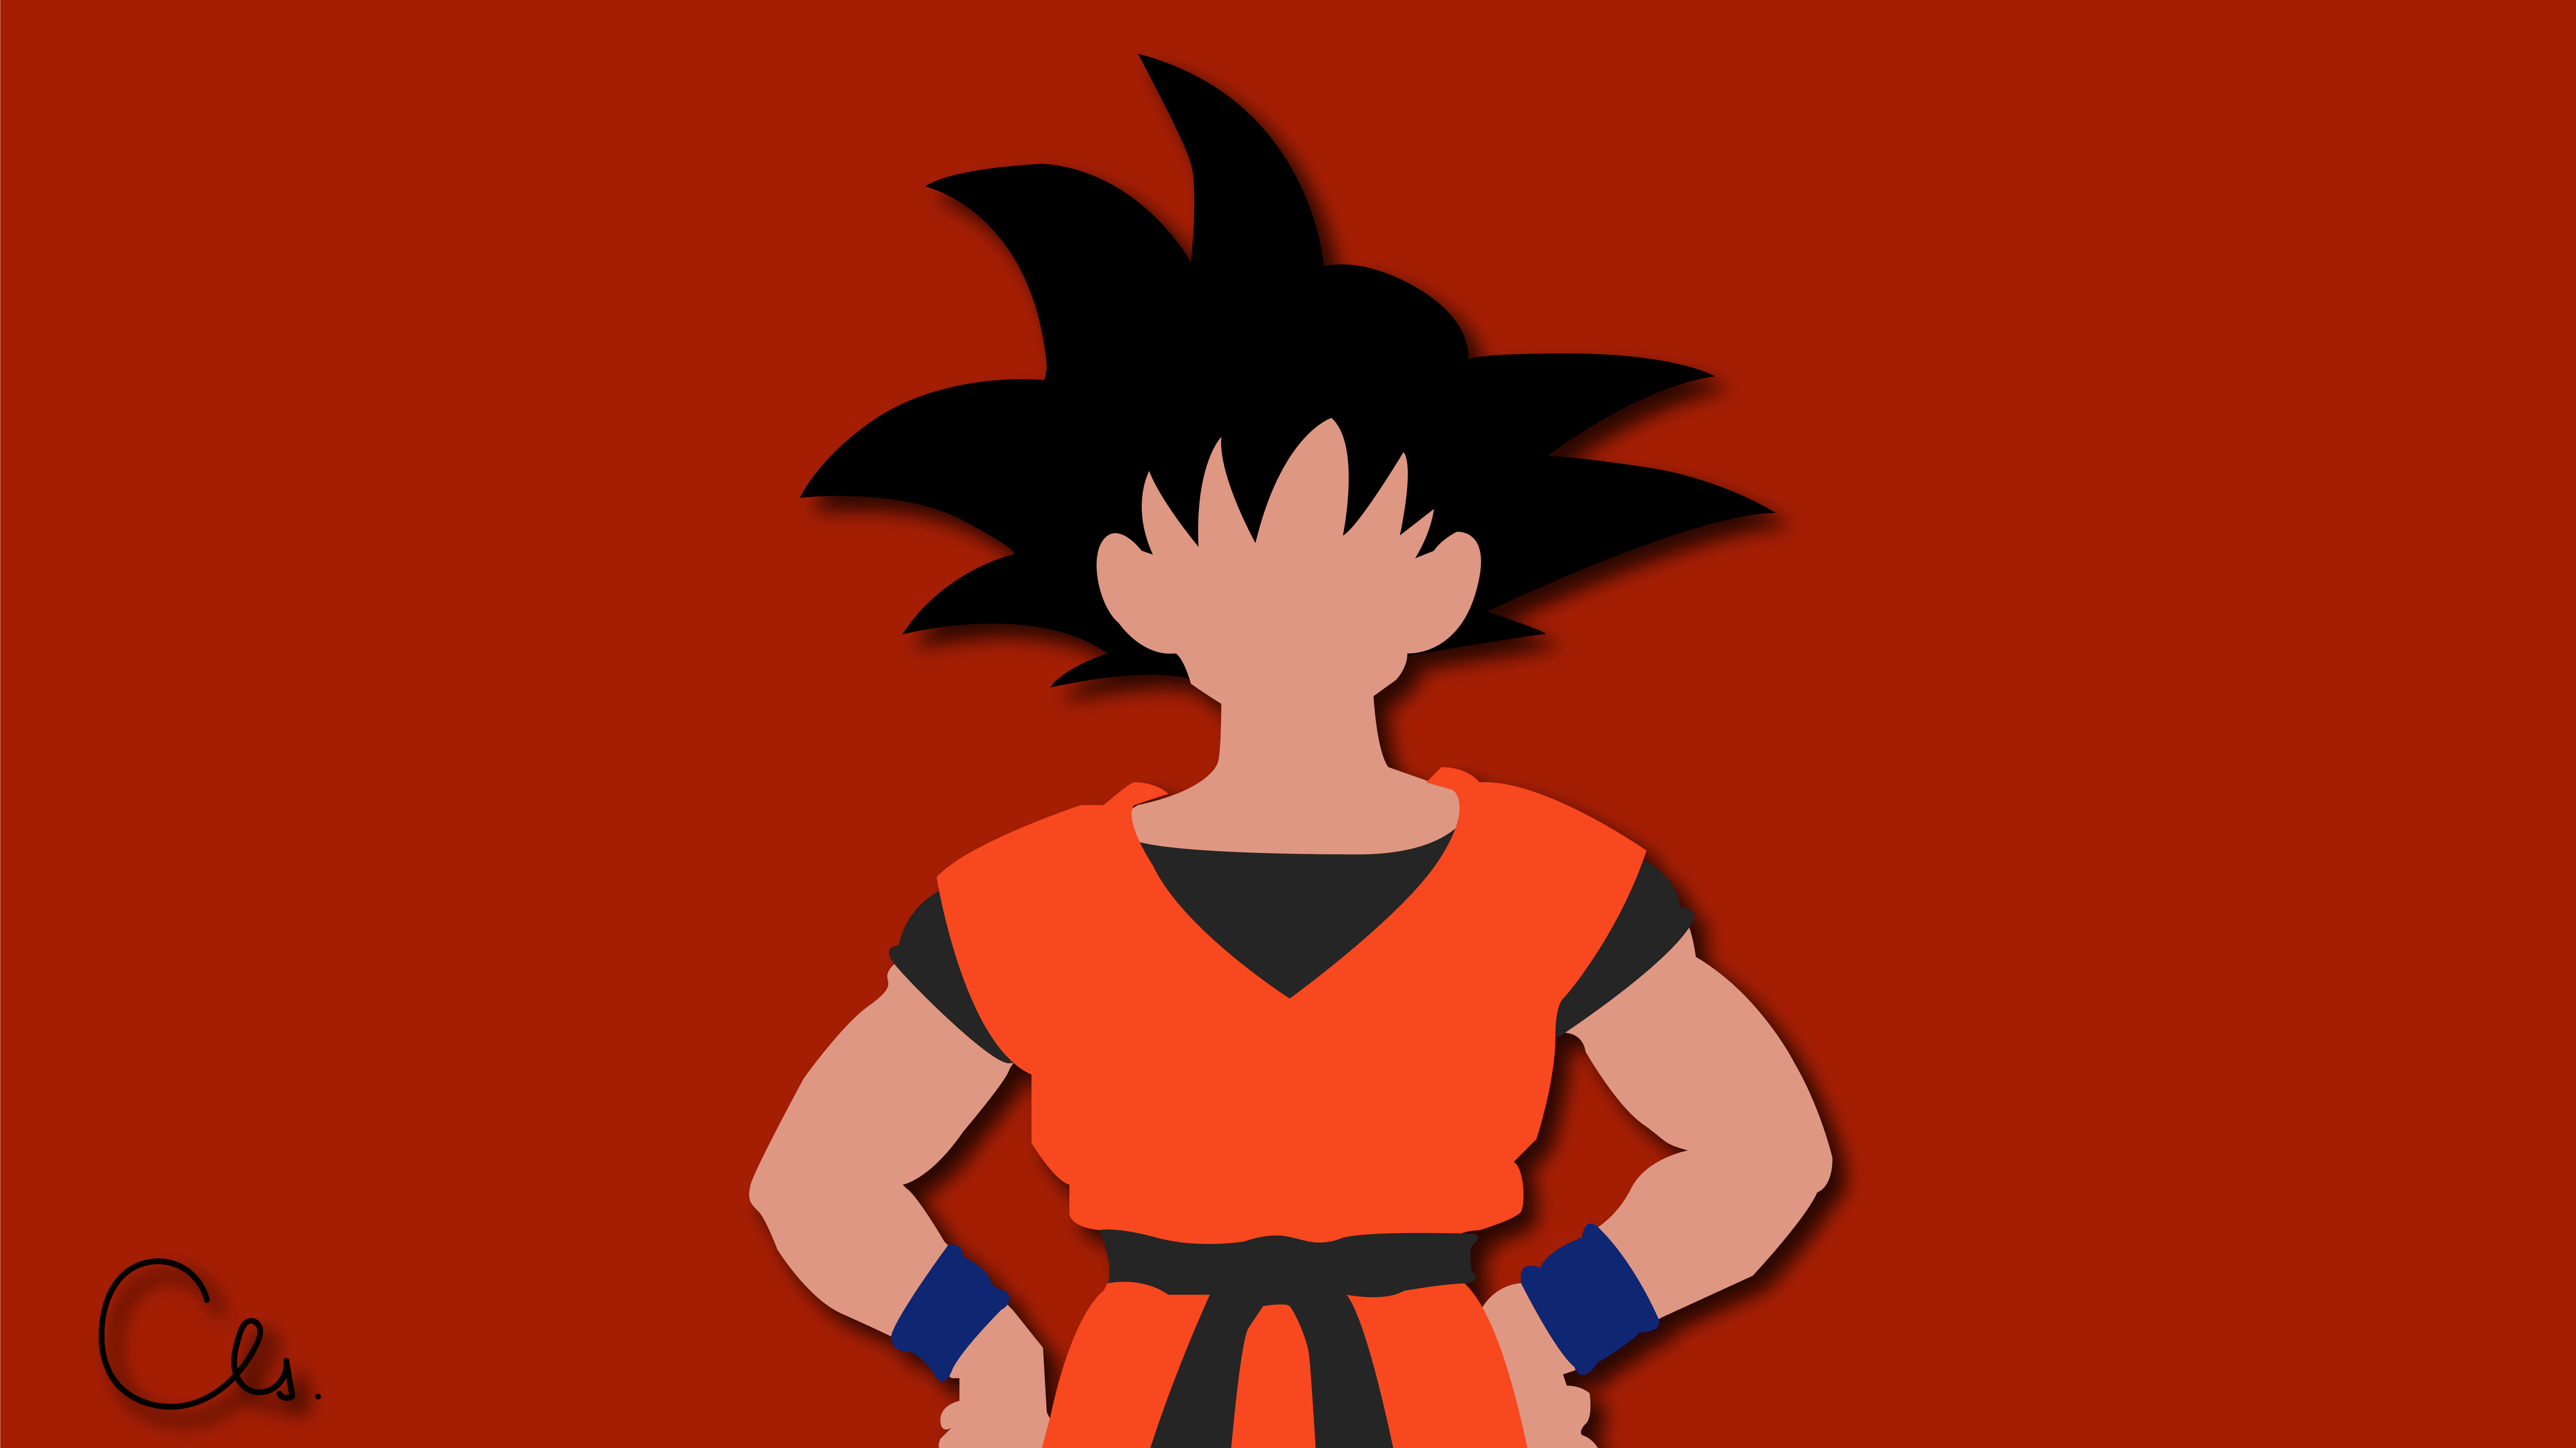 Son Goku Minimalist 4K Wallpaper, HD Minimalist 4K Wallpapers, Images,  Photos and Background - Wallpapers Den